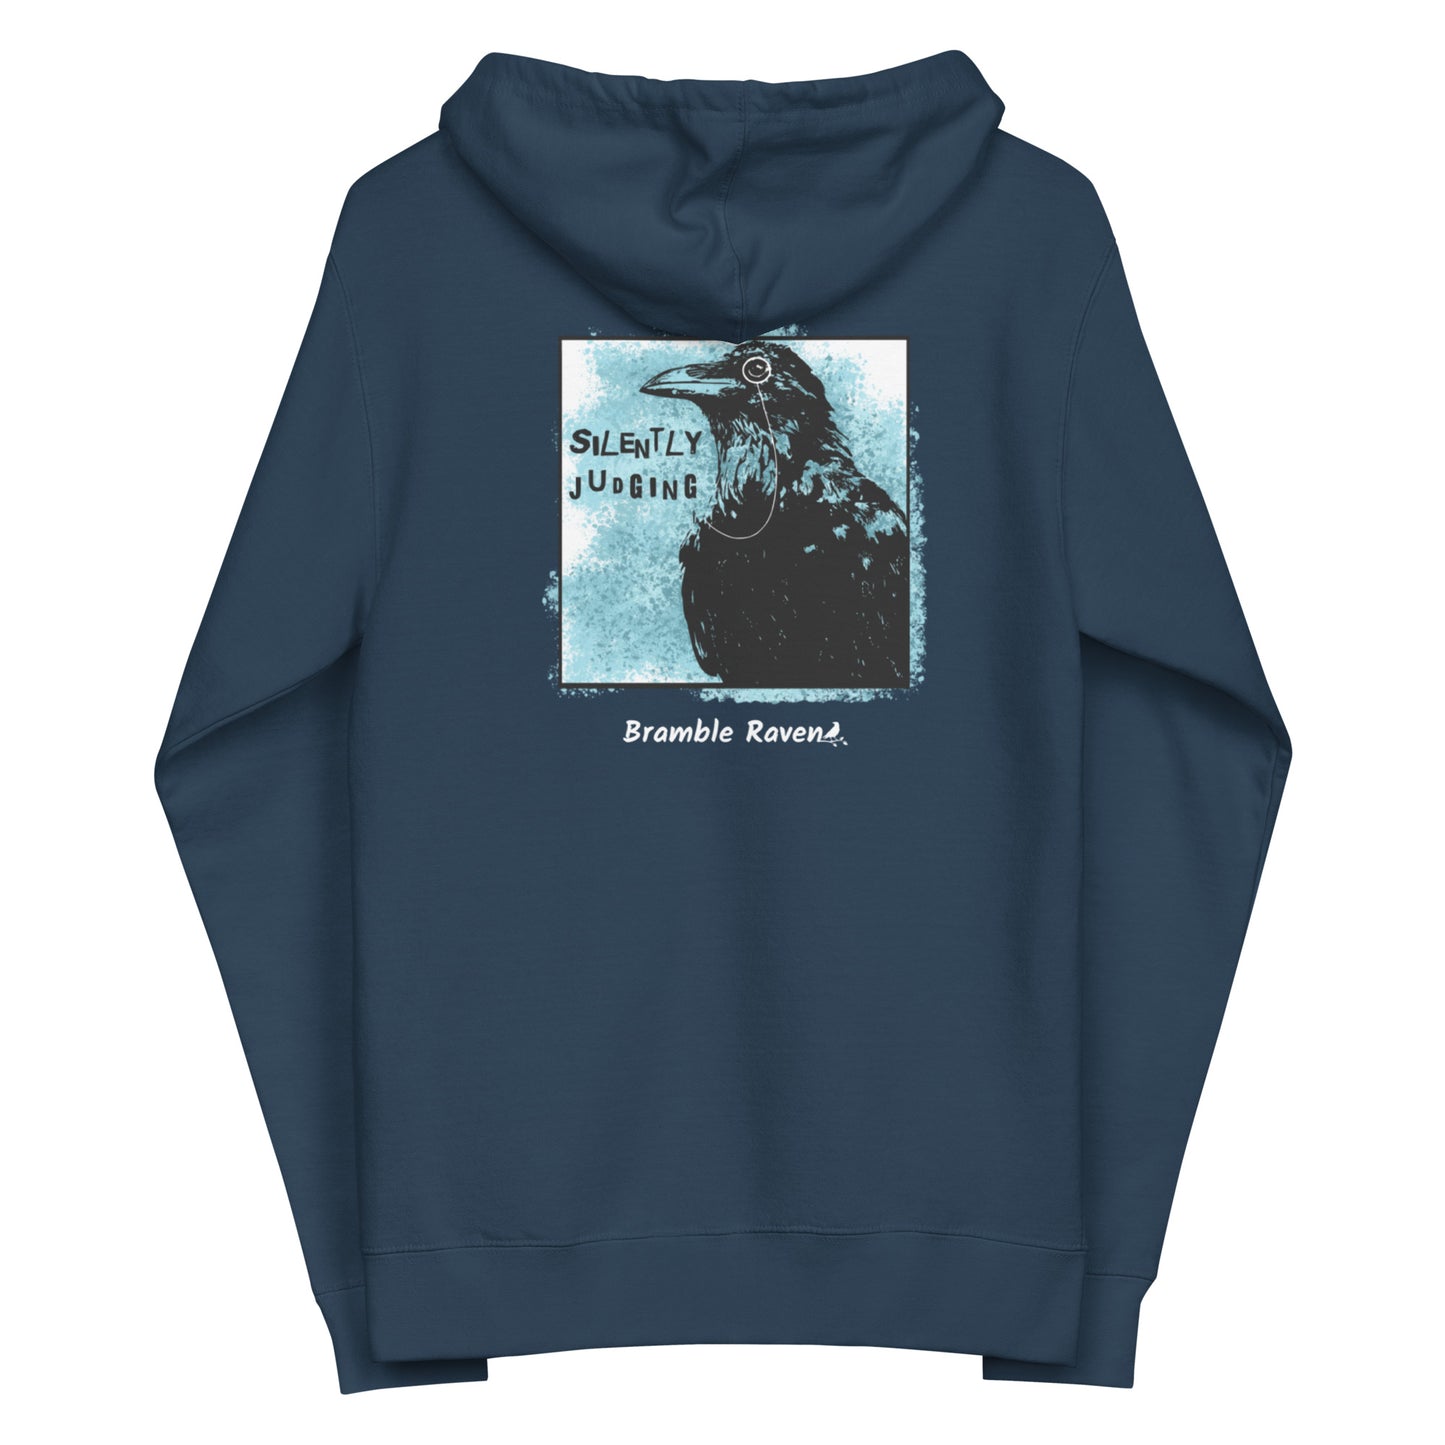 Unisex fleece-lined navy blue colored zip-up hoodie with silently judging text by black crow wearing a monocle in a square with blue paint splatters.  Design on the back of hoodie.